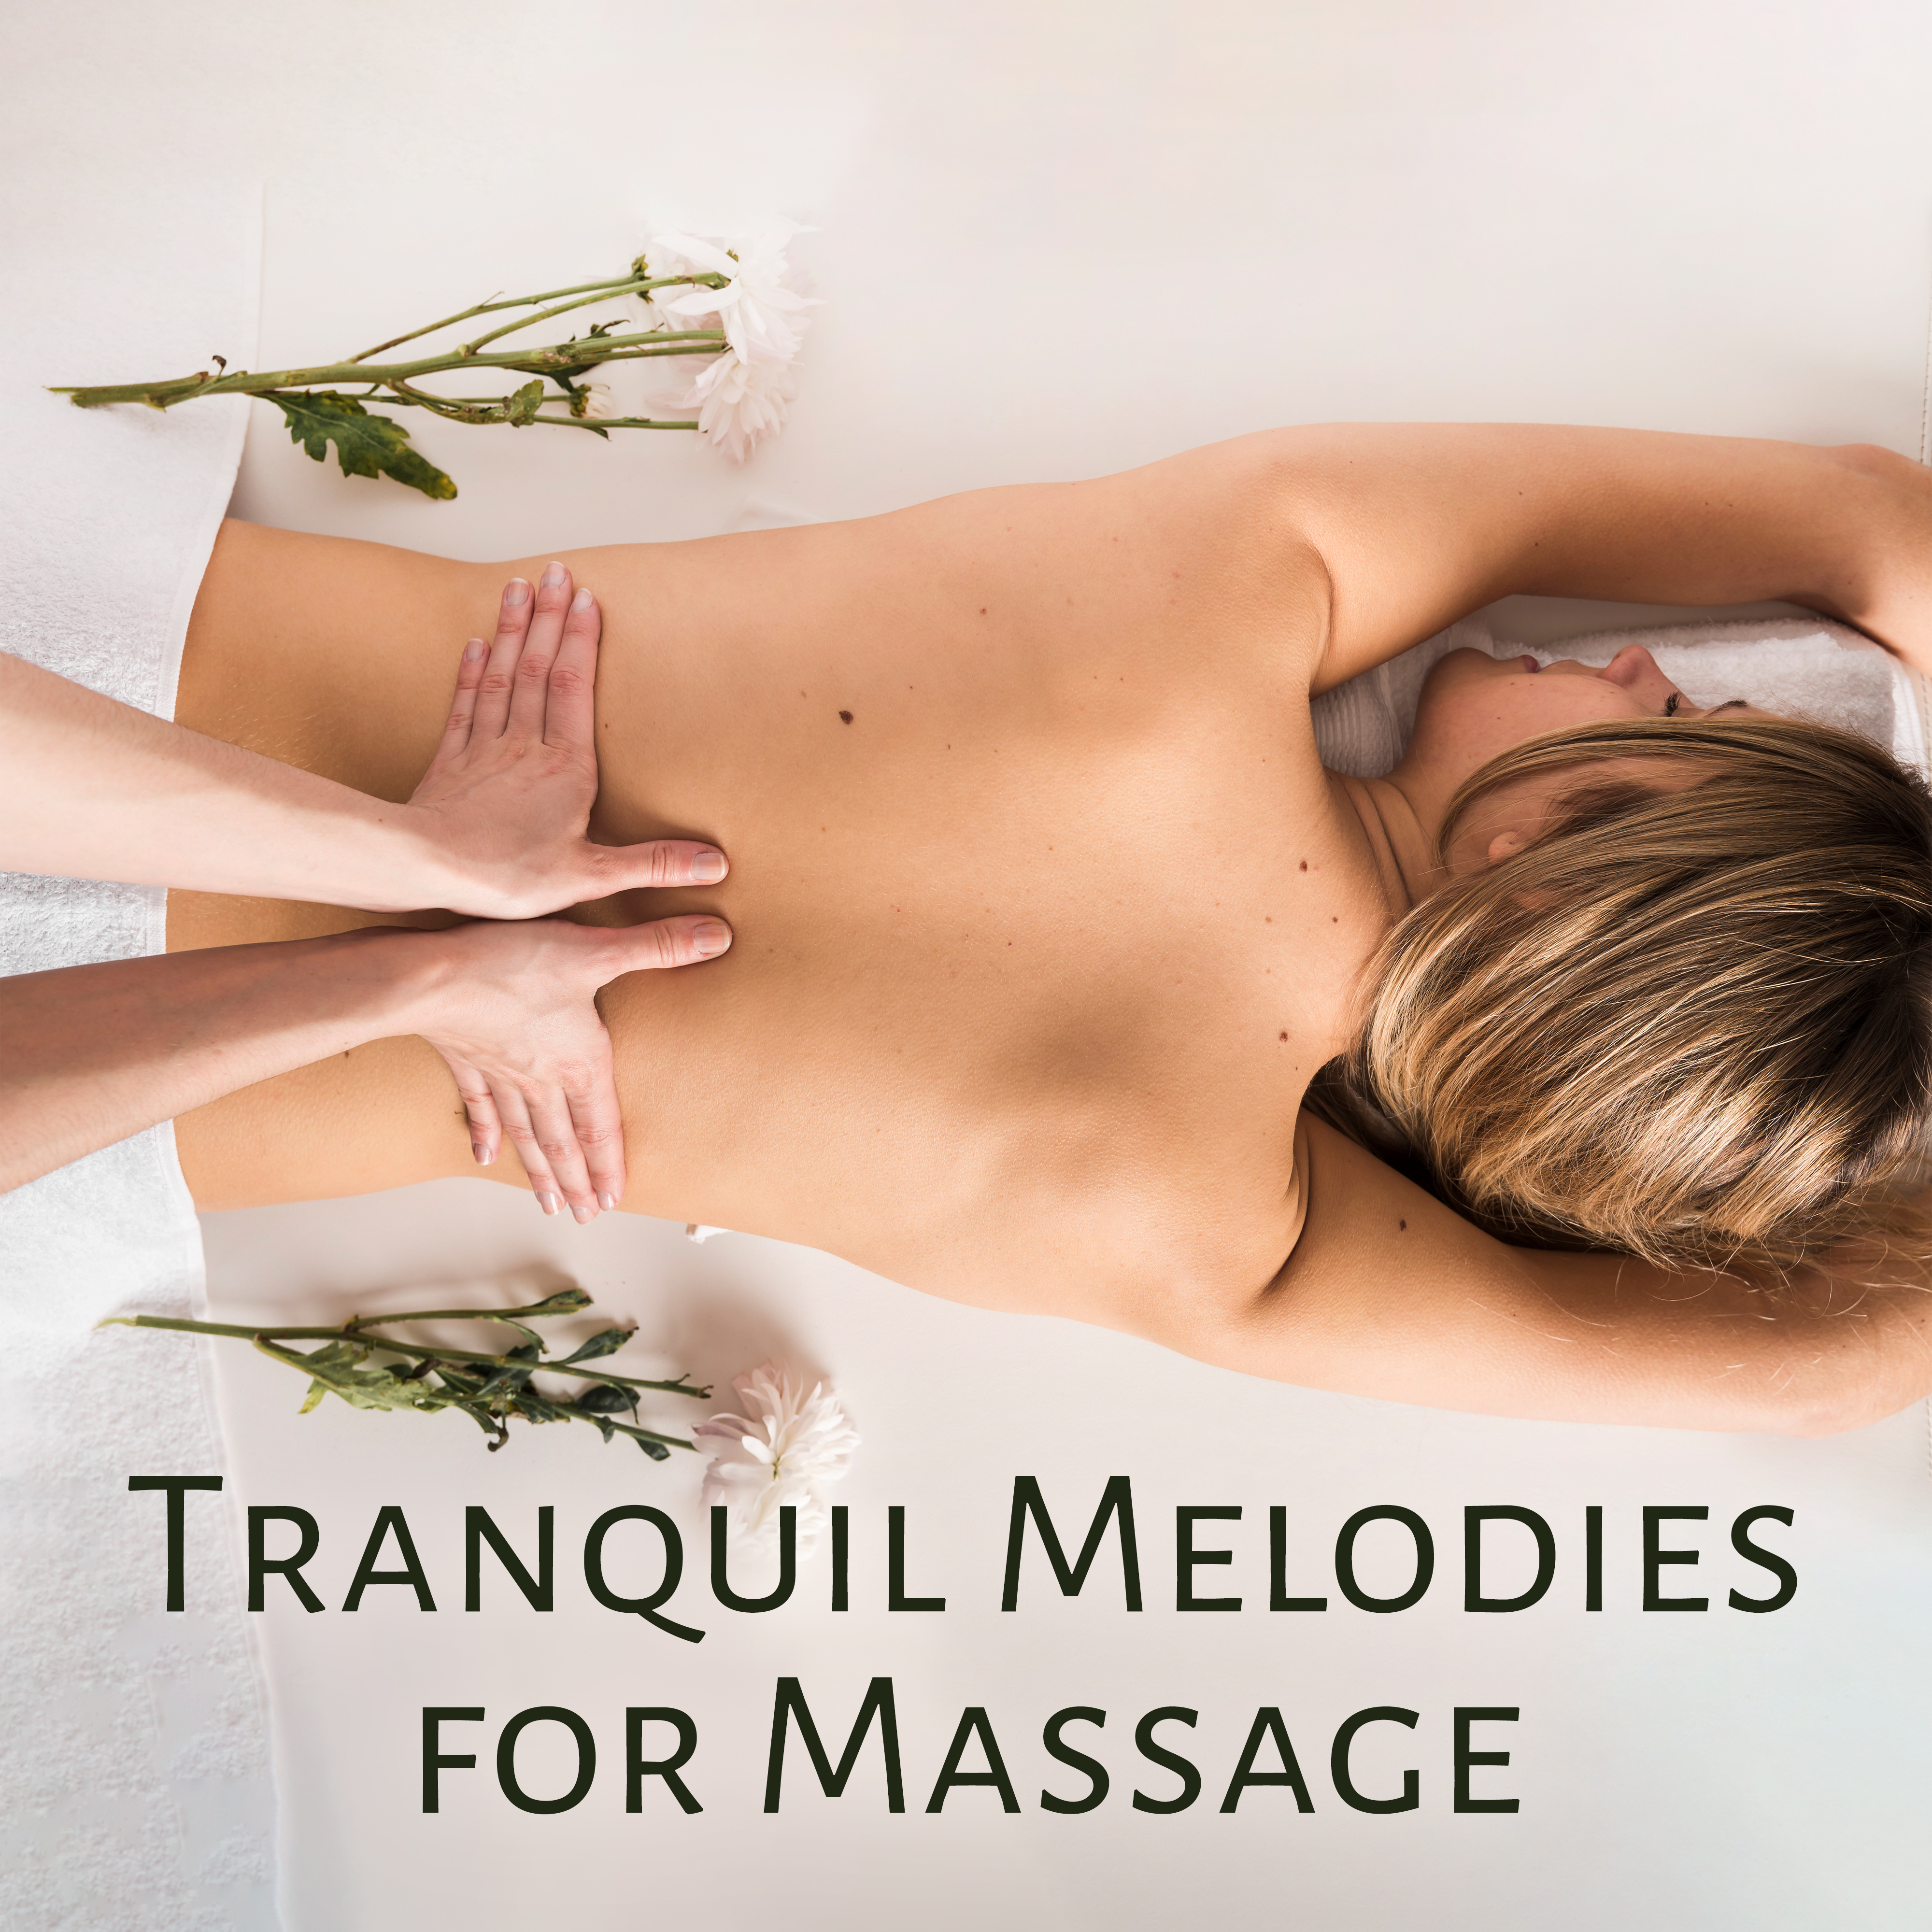 Tranquil Melodies for Massage